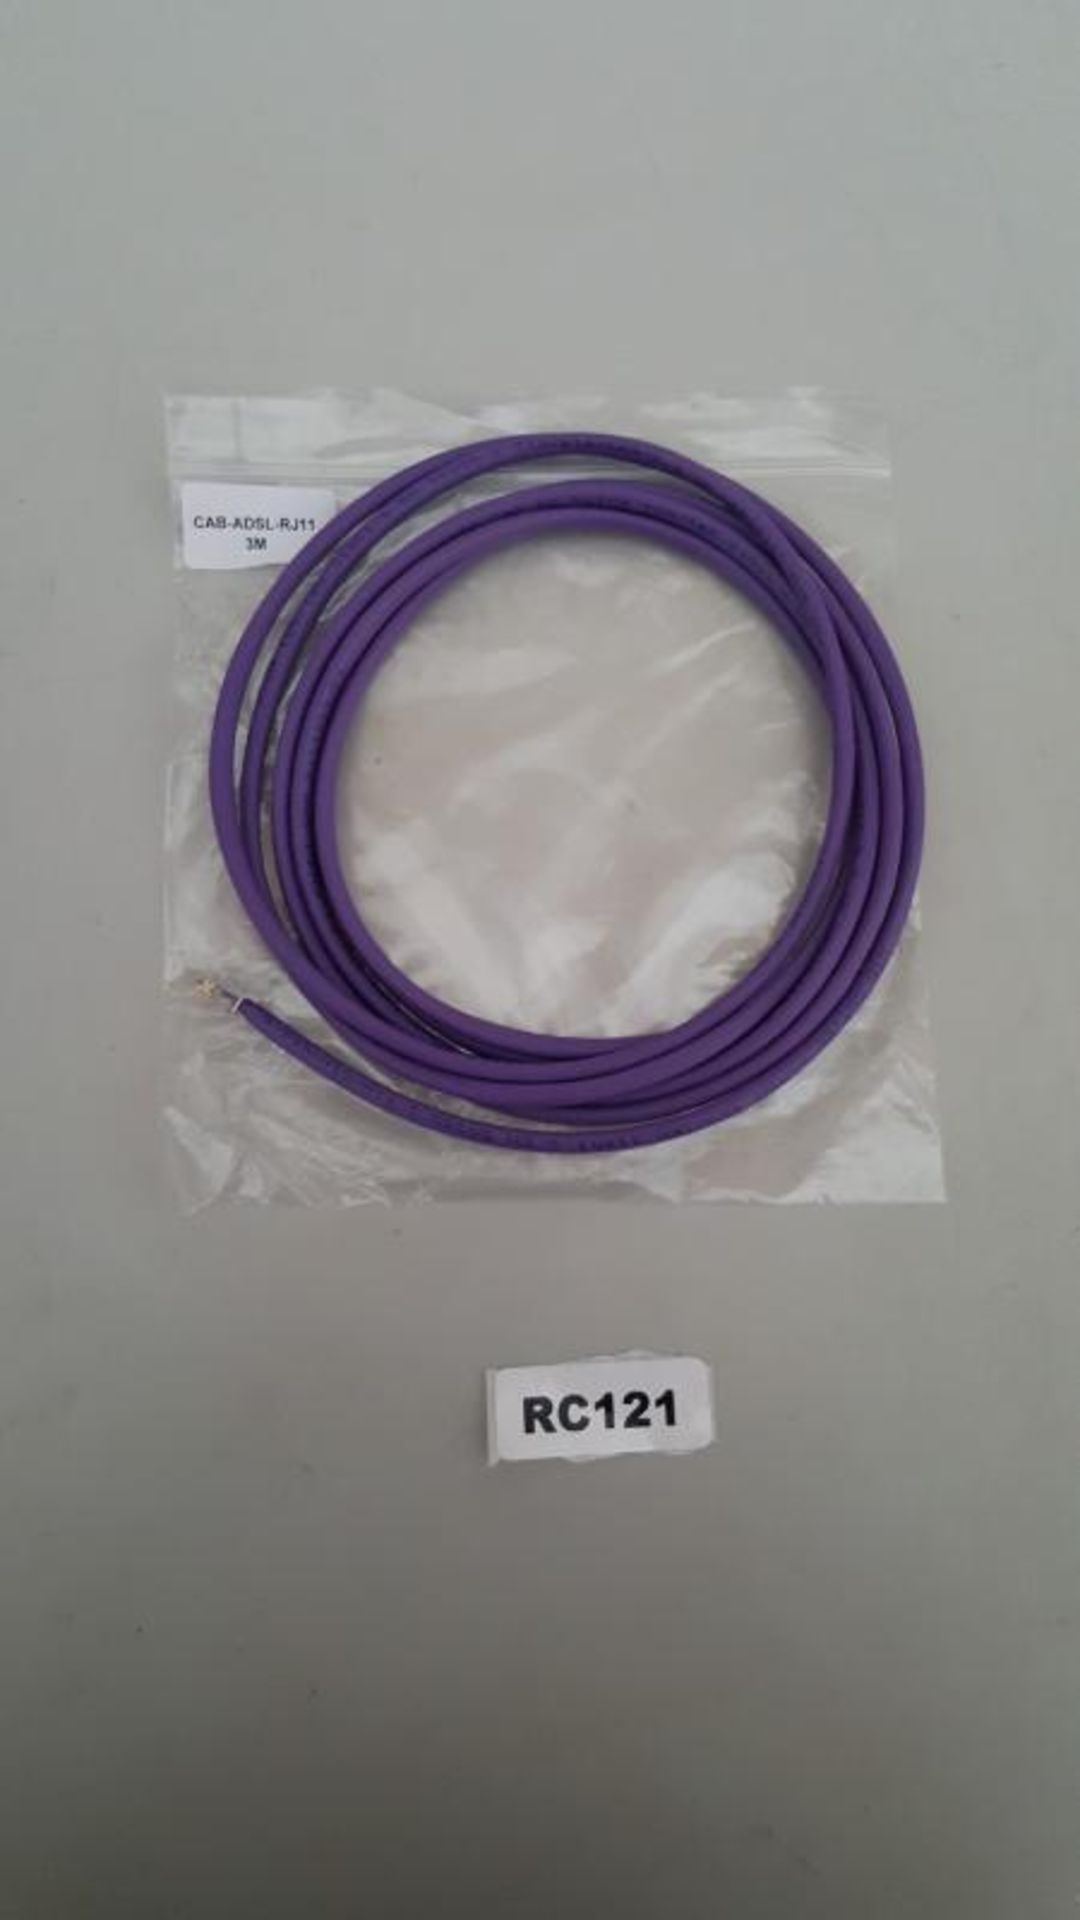 45 x 3M Ethernet Cables - Ref RC121 - CL011 - Location: Altrincham WA14 As per our terms and - Image 2 of 2